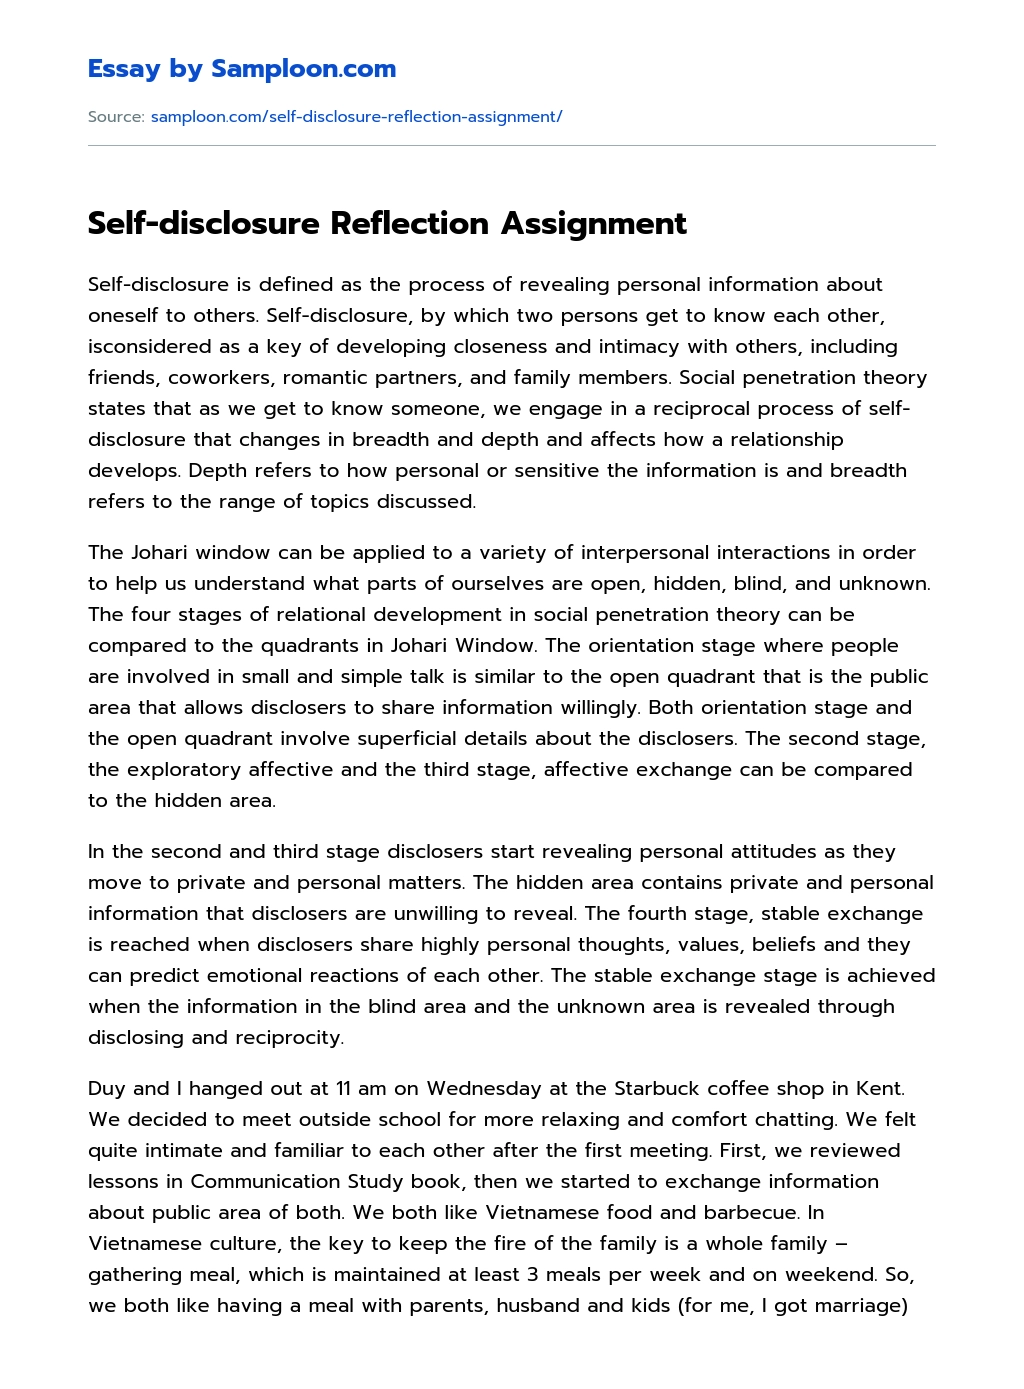 Self-disclosure Reflection Assignment essay